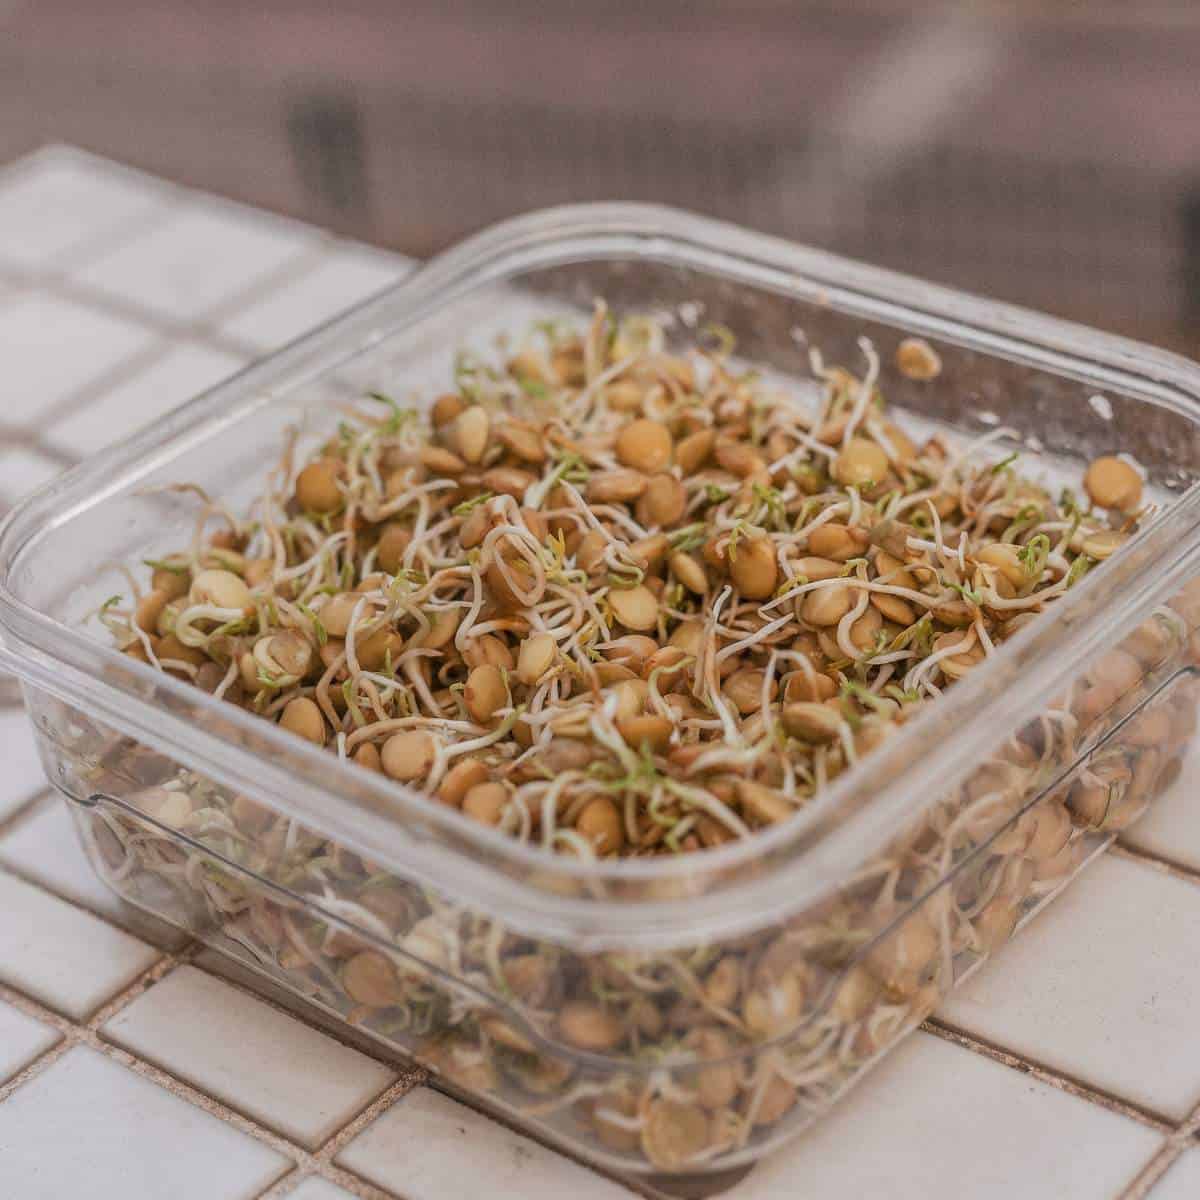 Frozen sprouts in a clear container on a tiled floor.